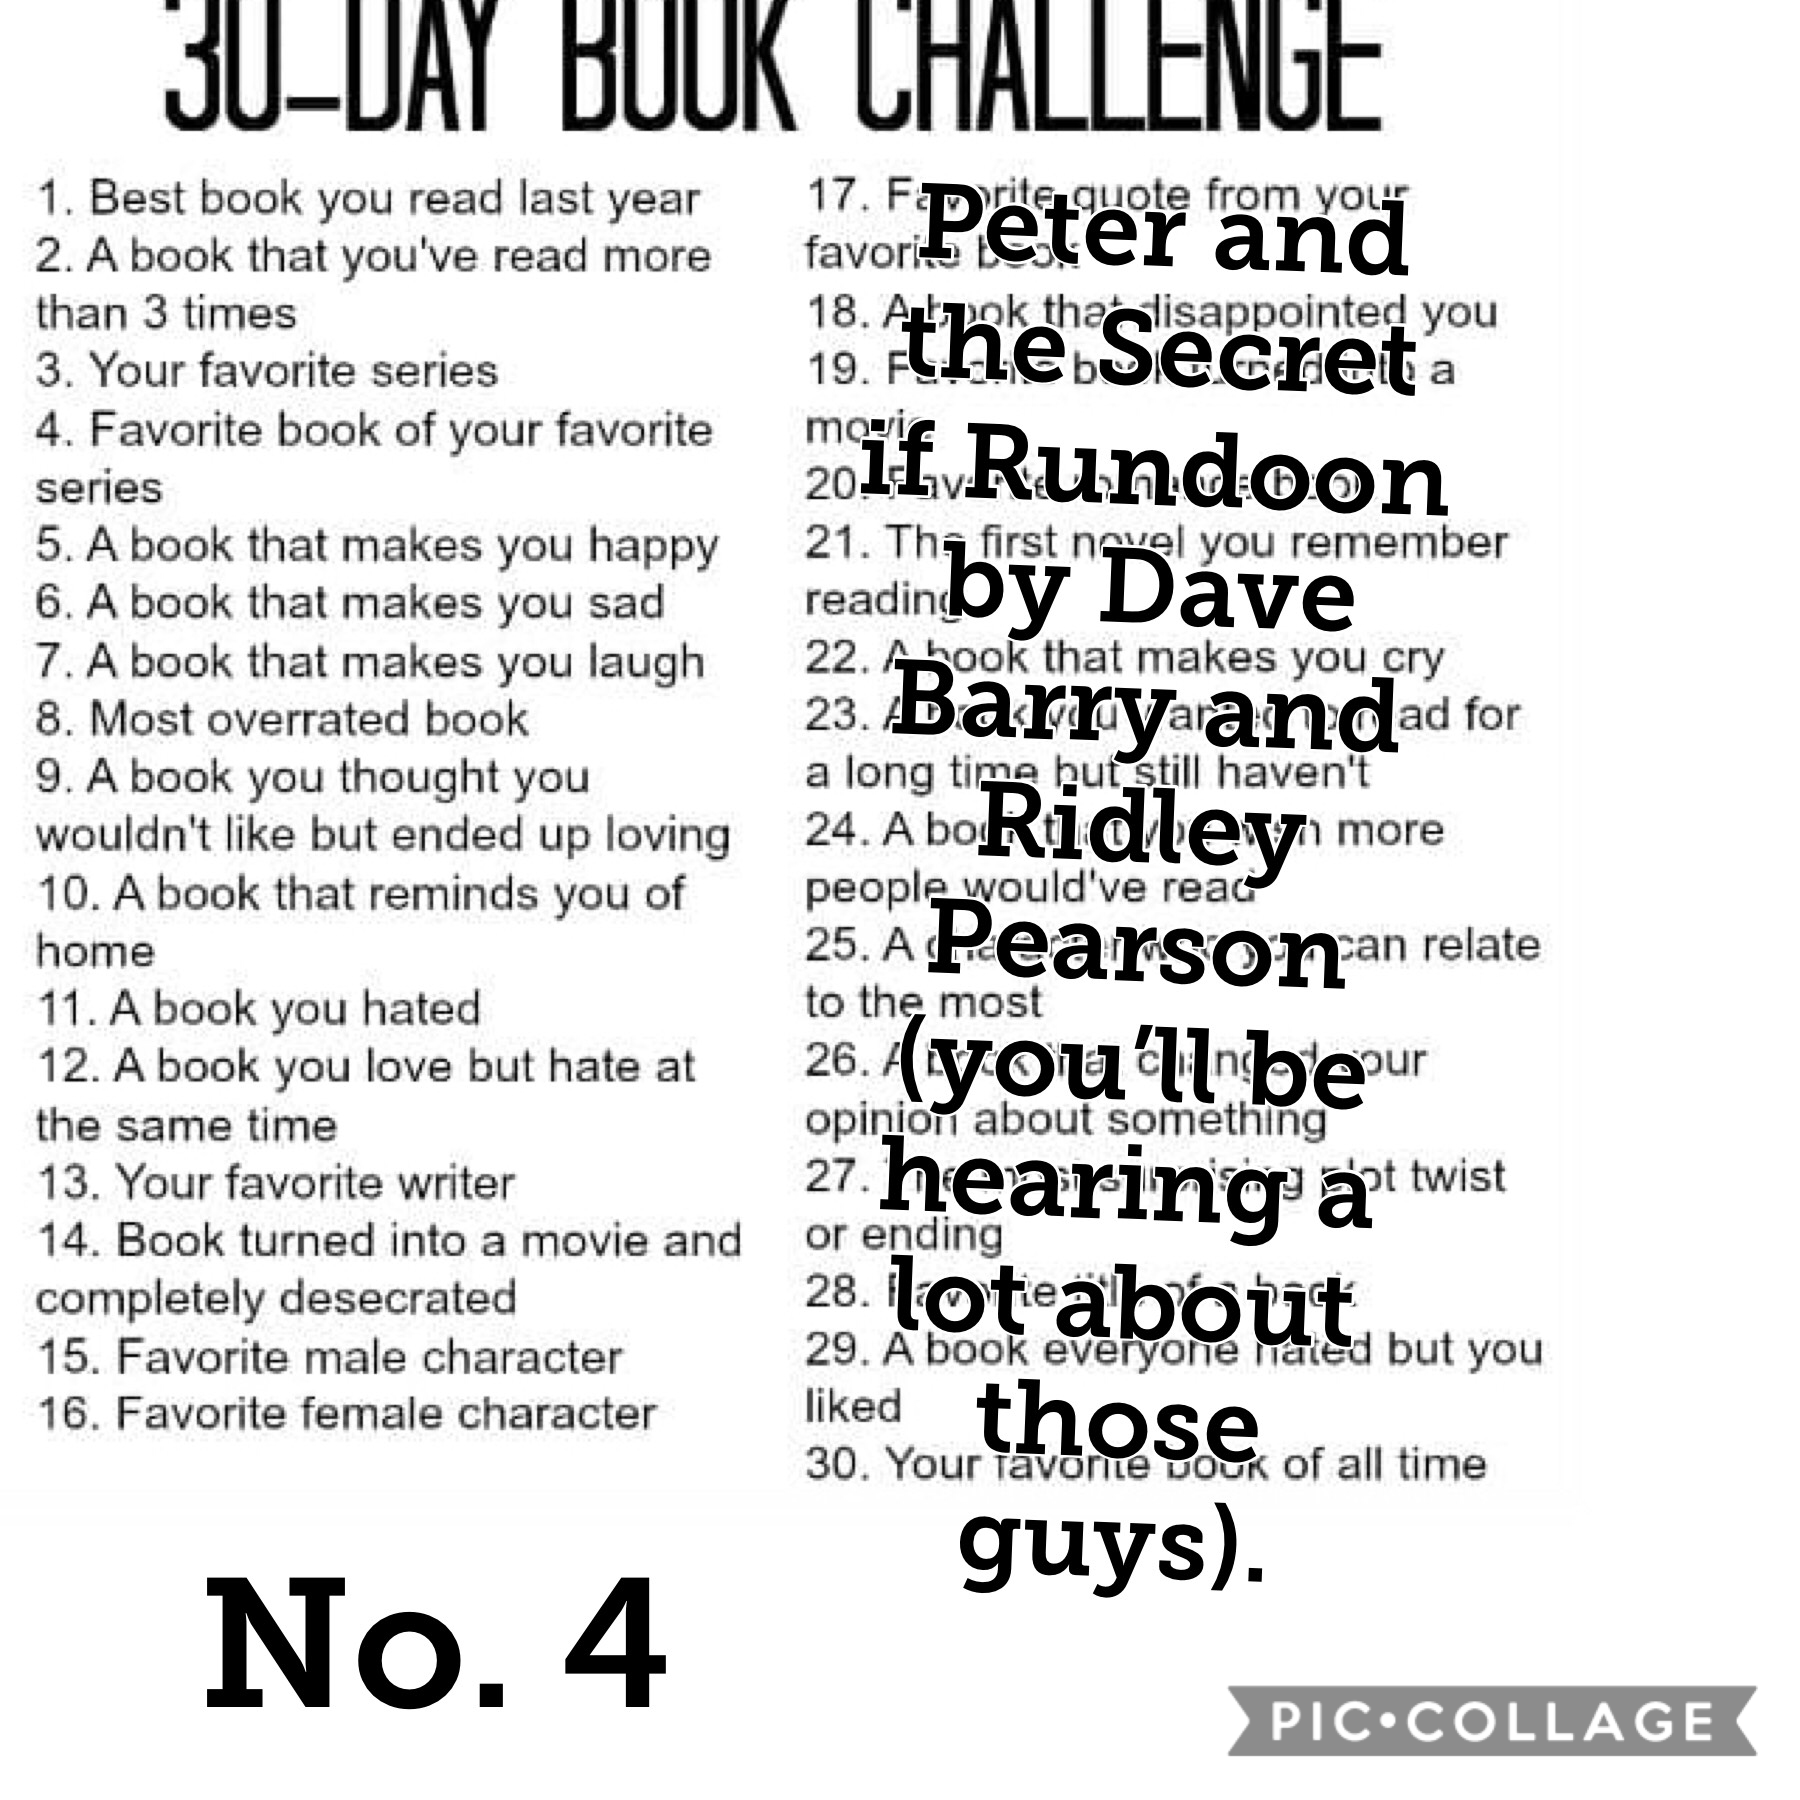 Also Peter and the bridge to neverland. If we’re counting a completely other series then my other favorite series is Harry Potter and my fave book’d be.... Half-Blood Prince :)